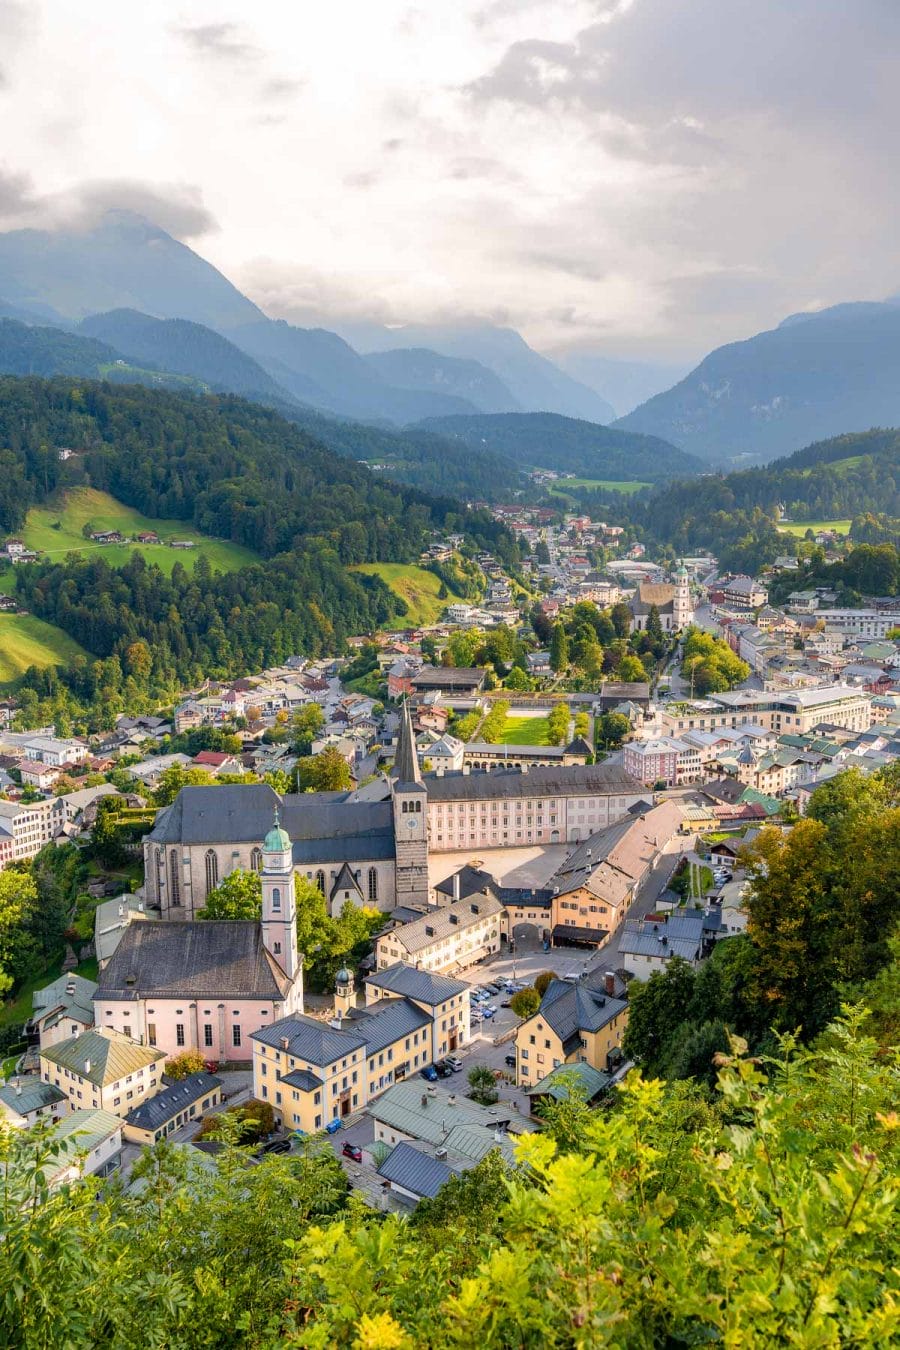 Panoramic view of the town of Berchtesgaden from Lockstein observation deck